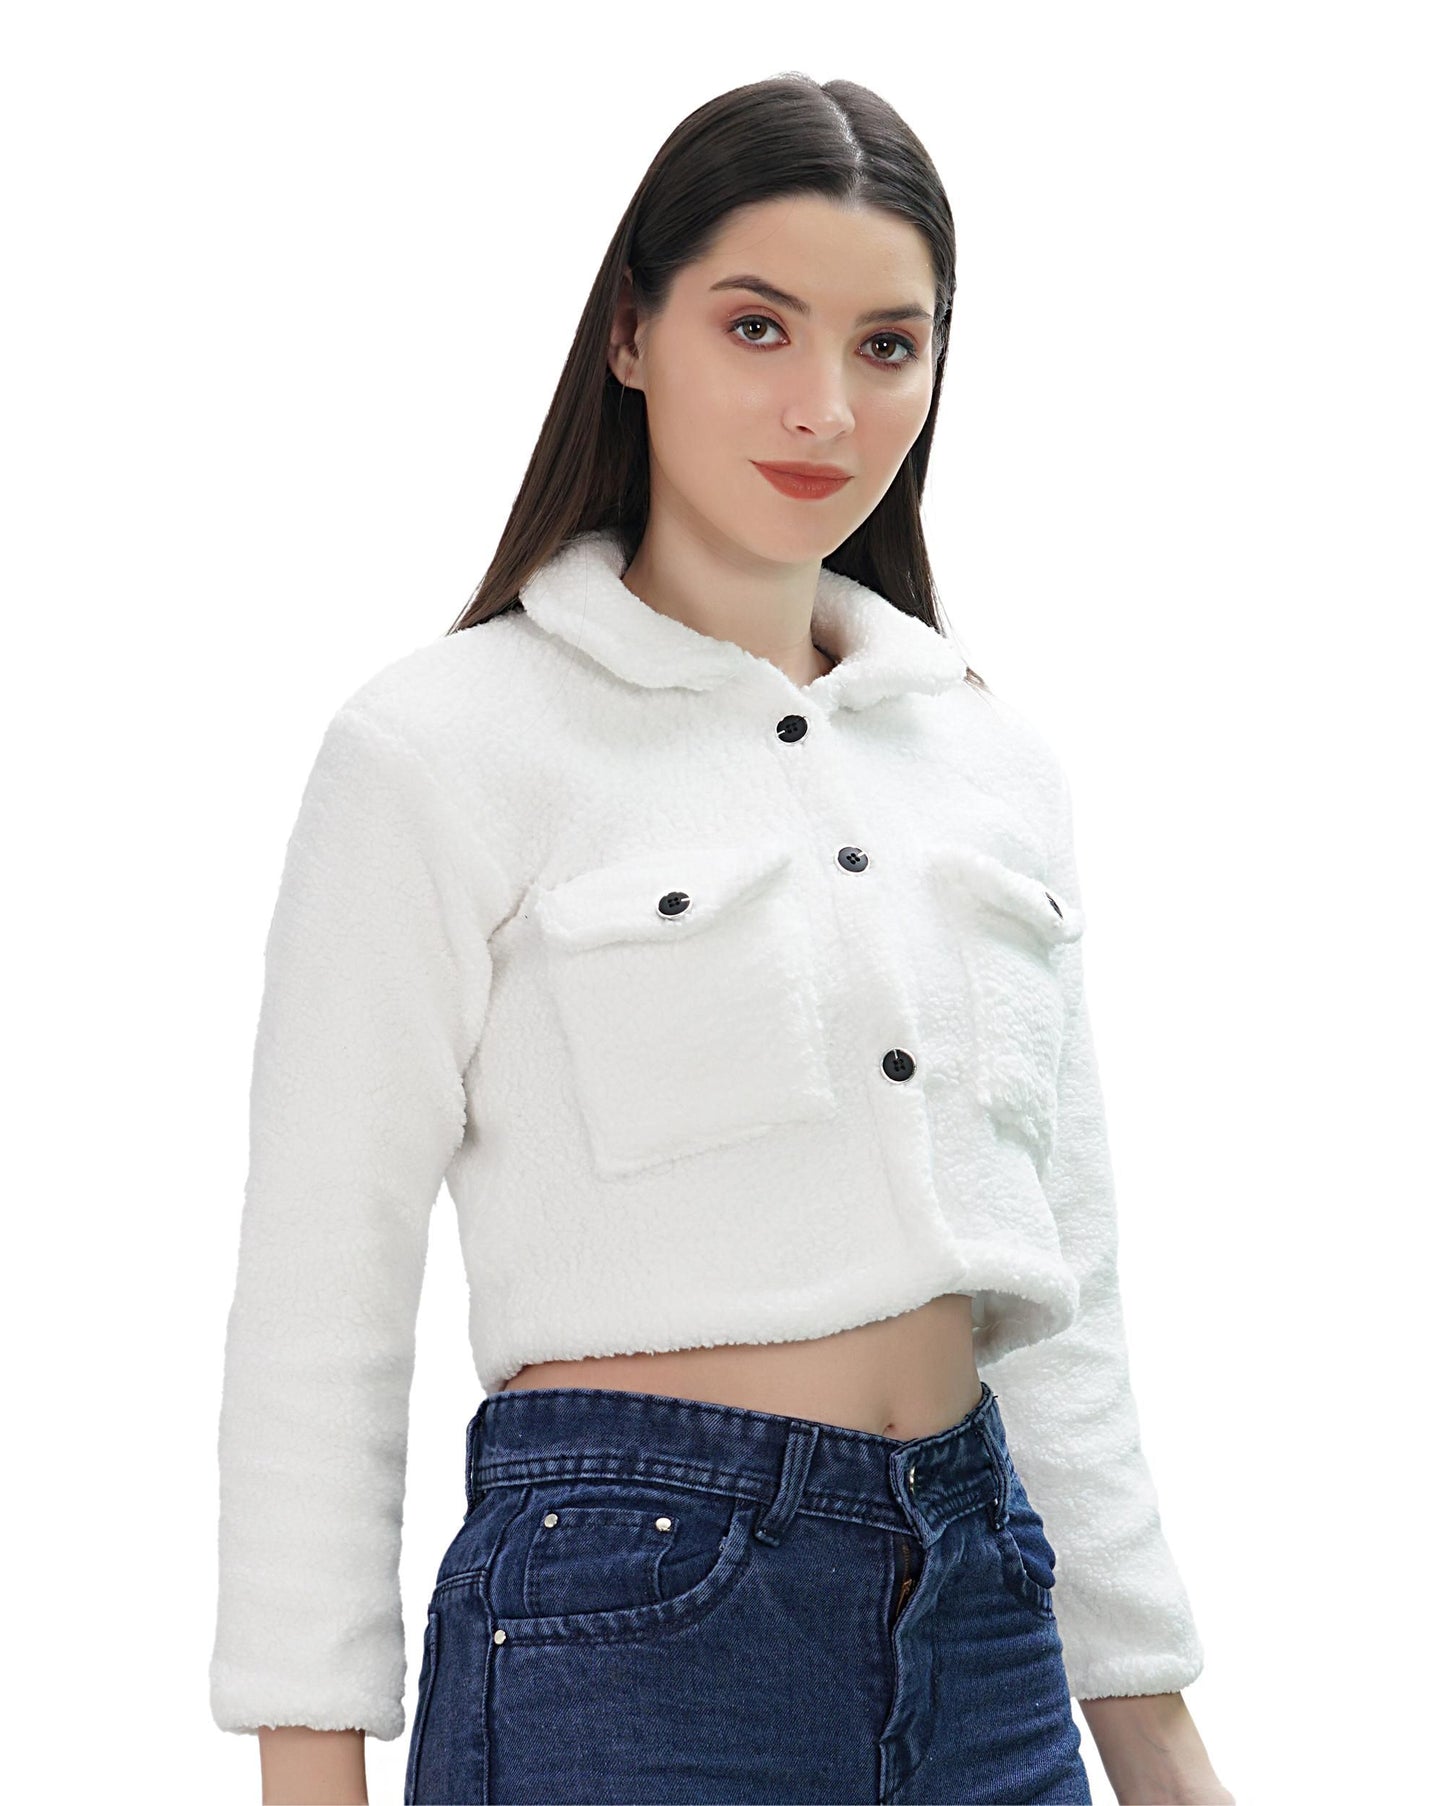 Lily Buds Wool Jacket For Women (White)